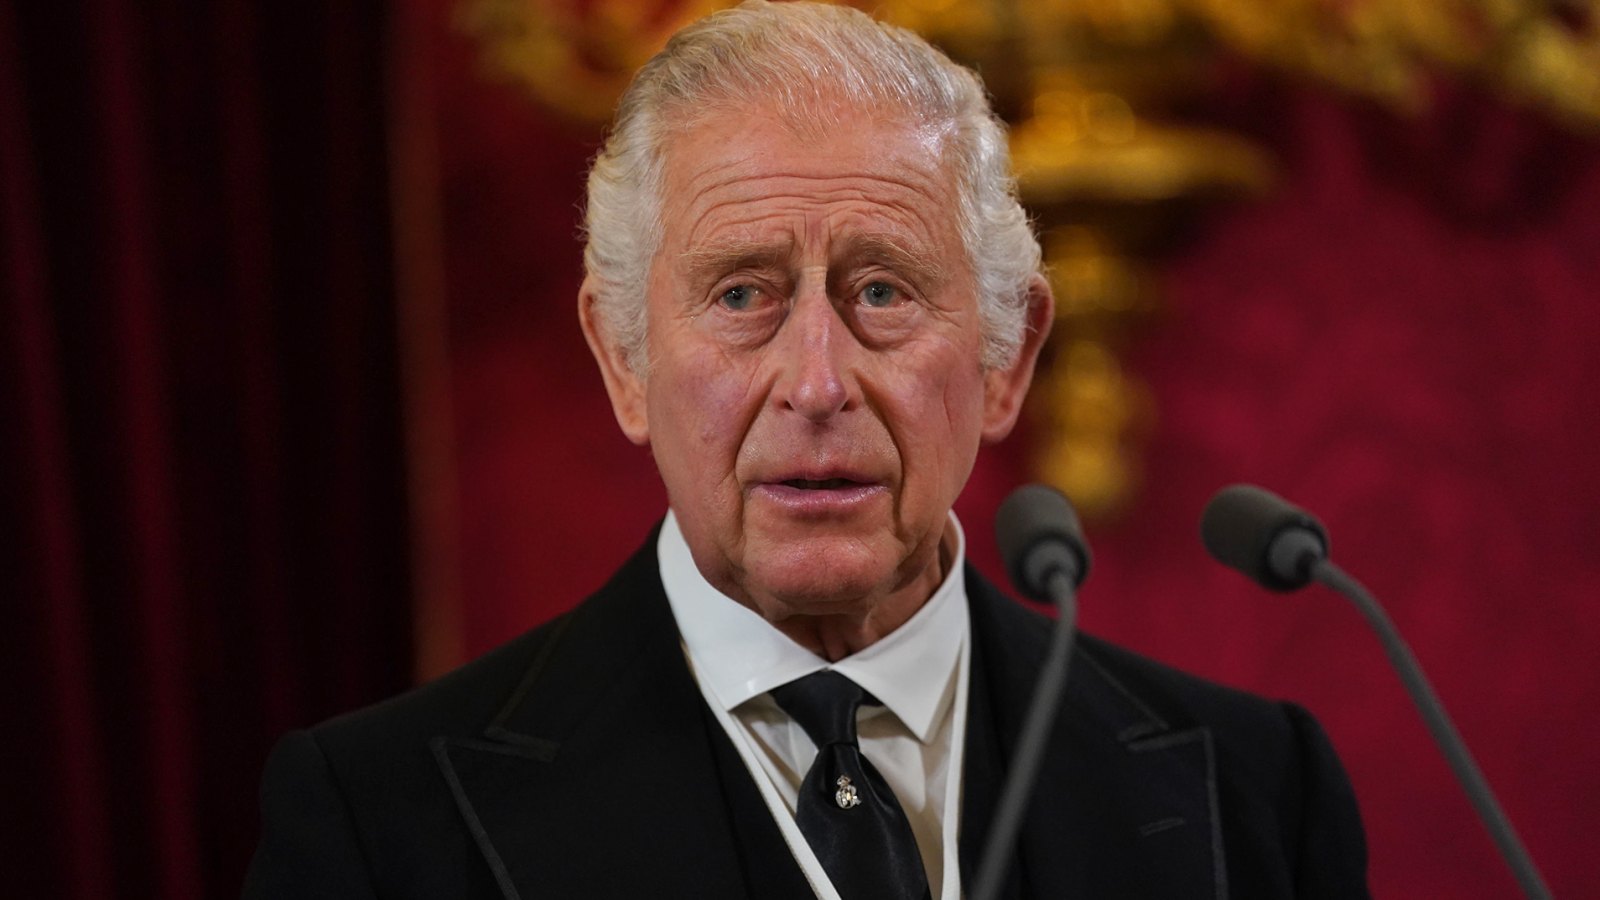 King Charles III Pledges to 'Continue the Tradition' of the Monarchy As He Is Officially Proclaimed Monarch